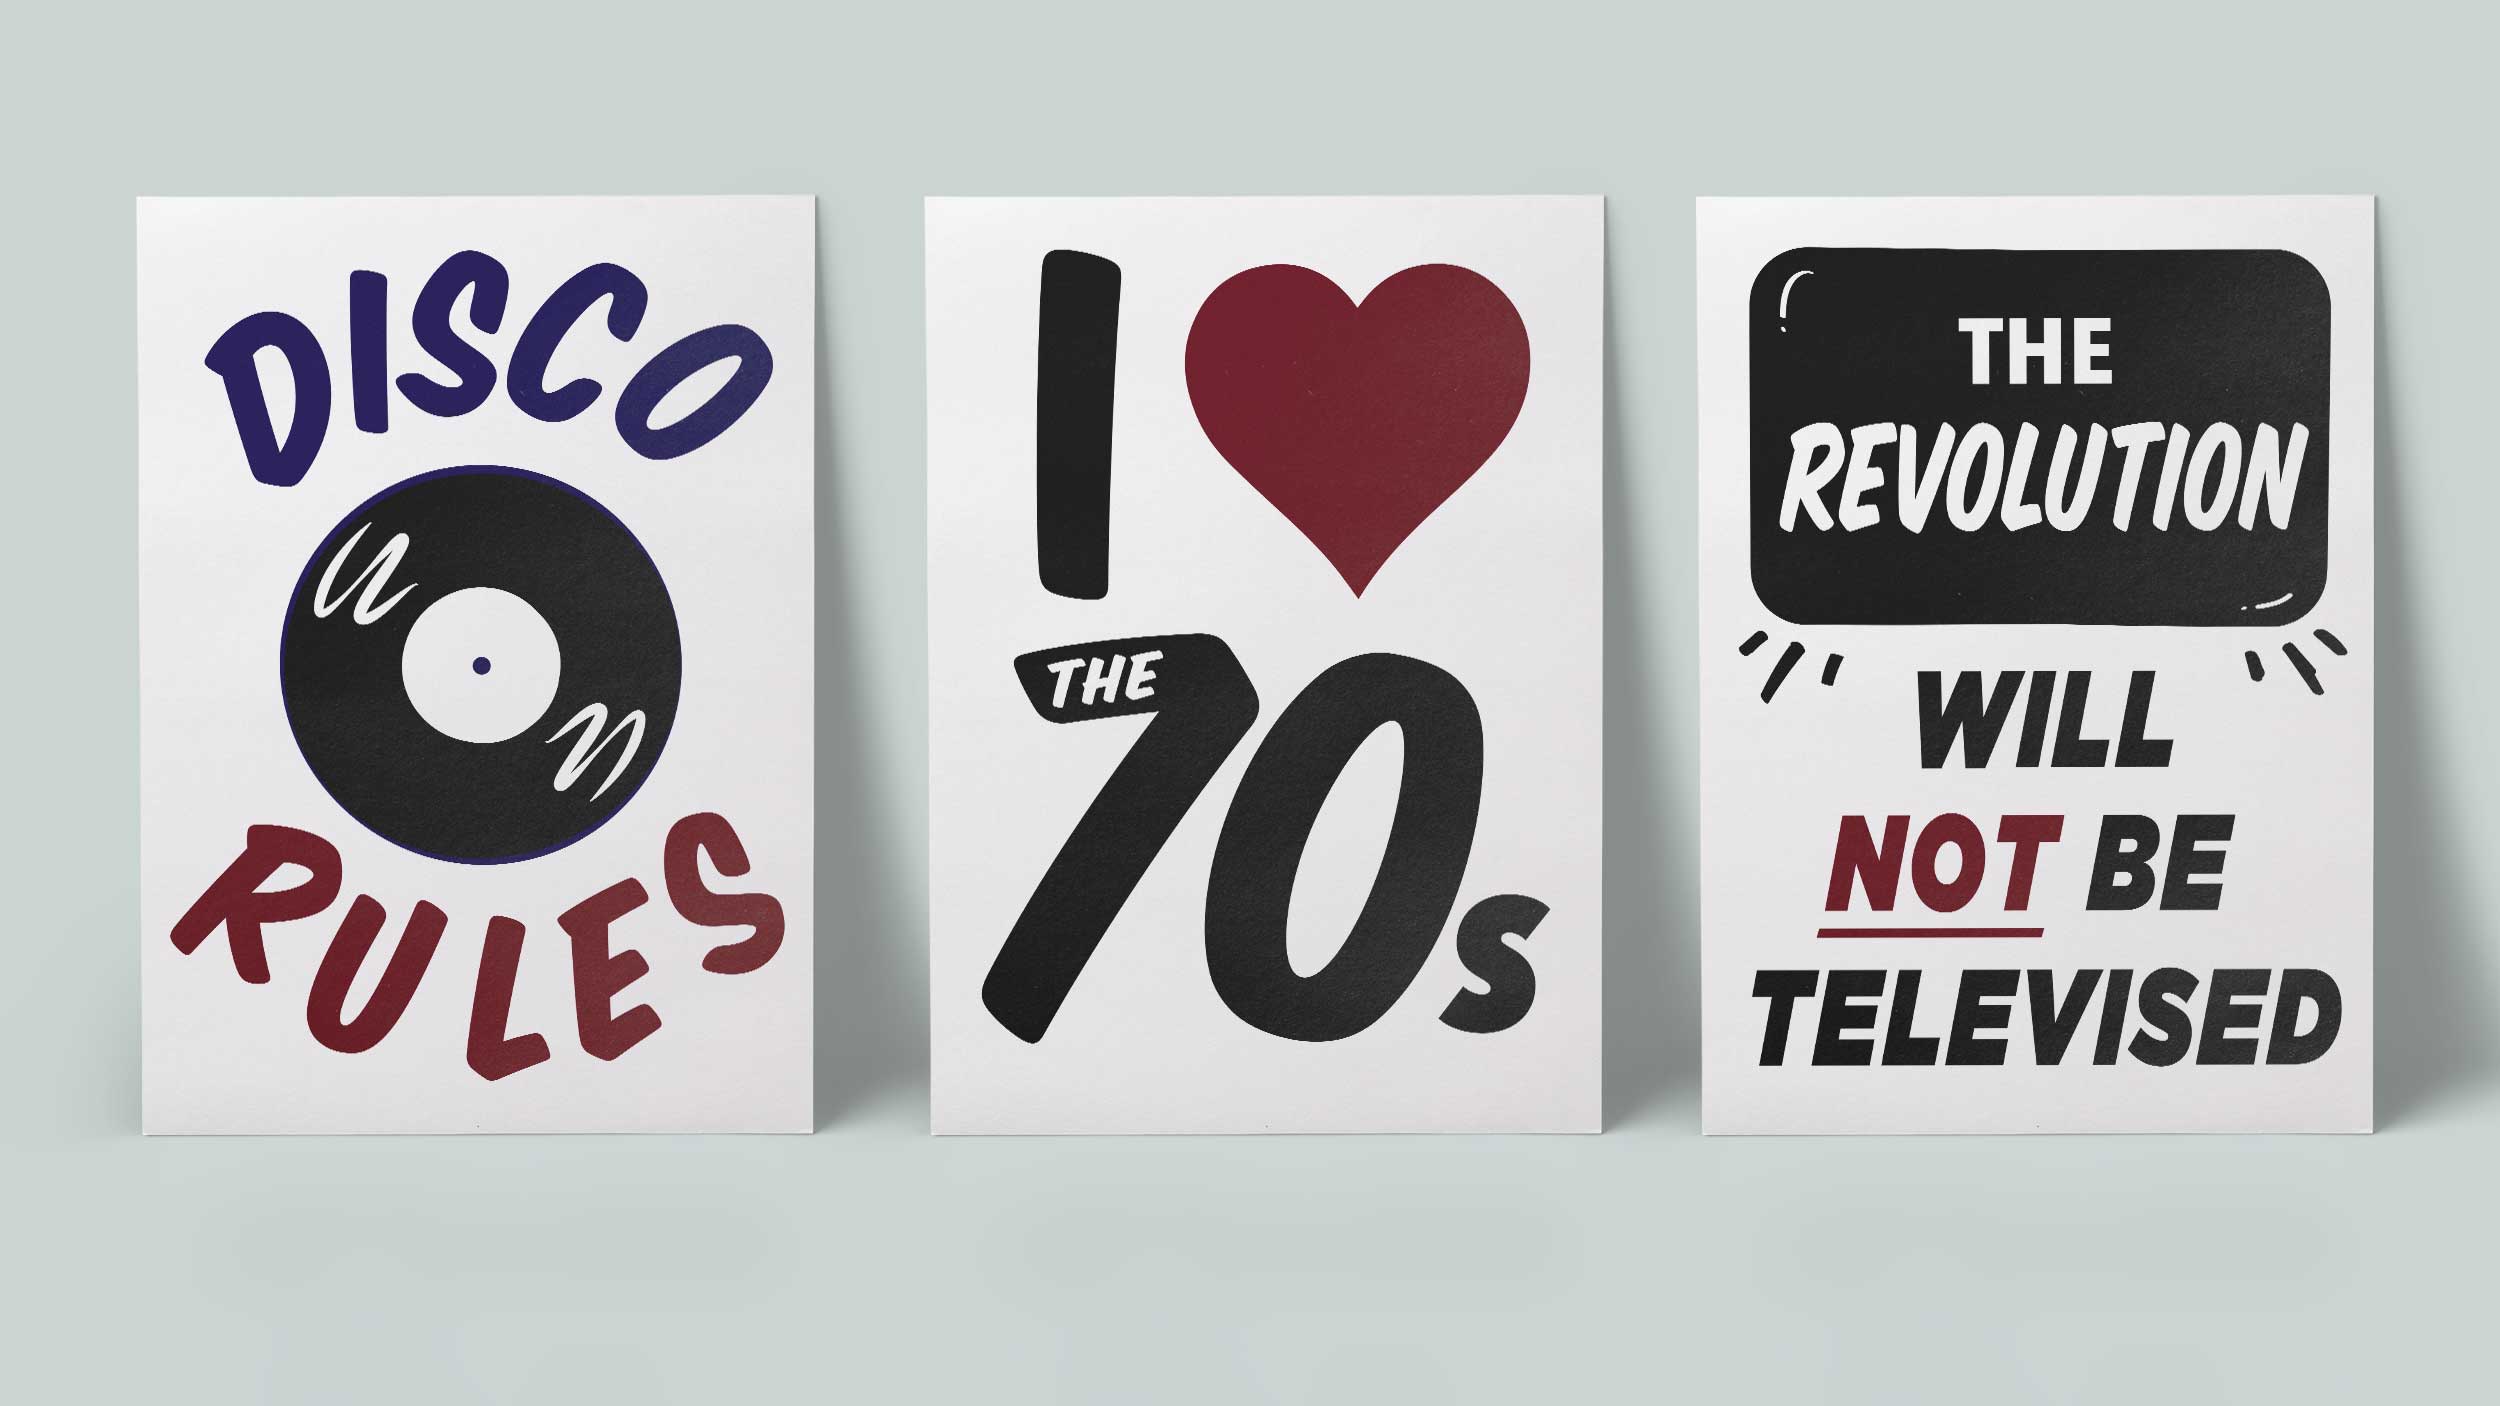 The Seventies – Brand Campaign